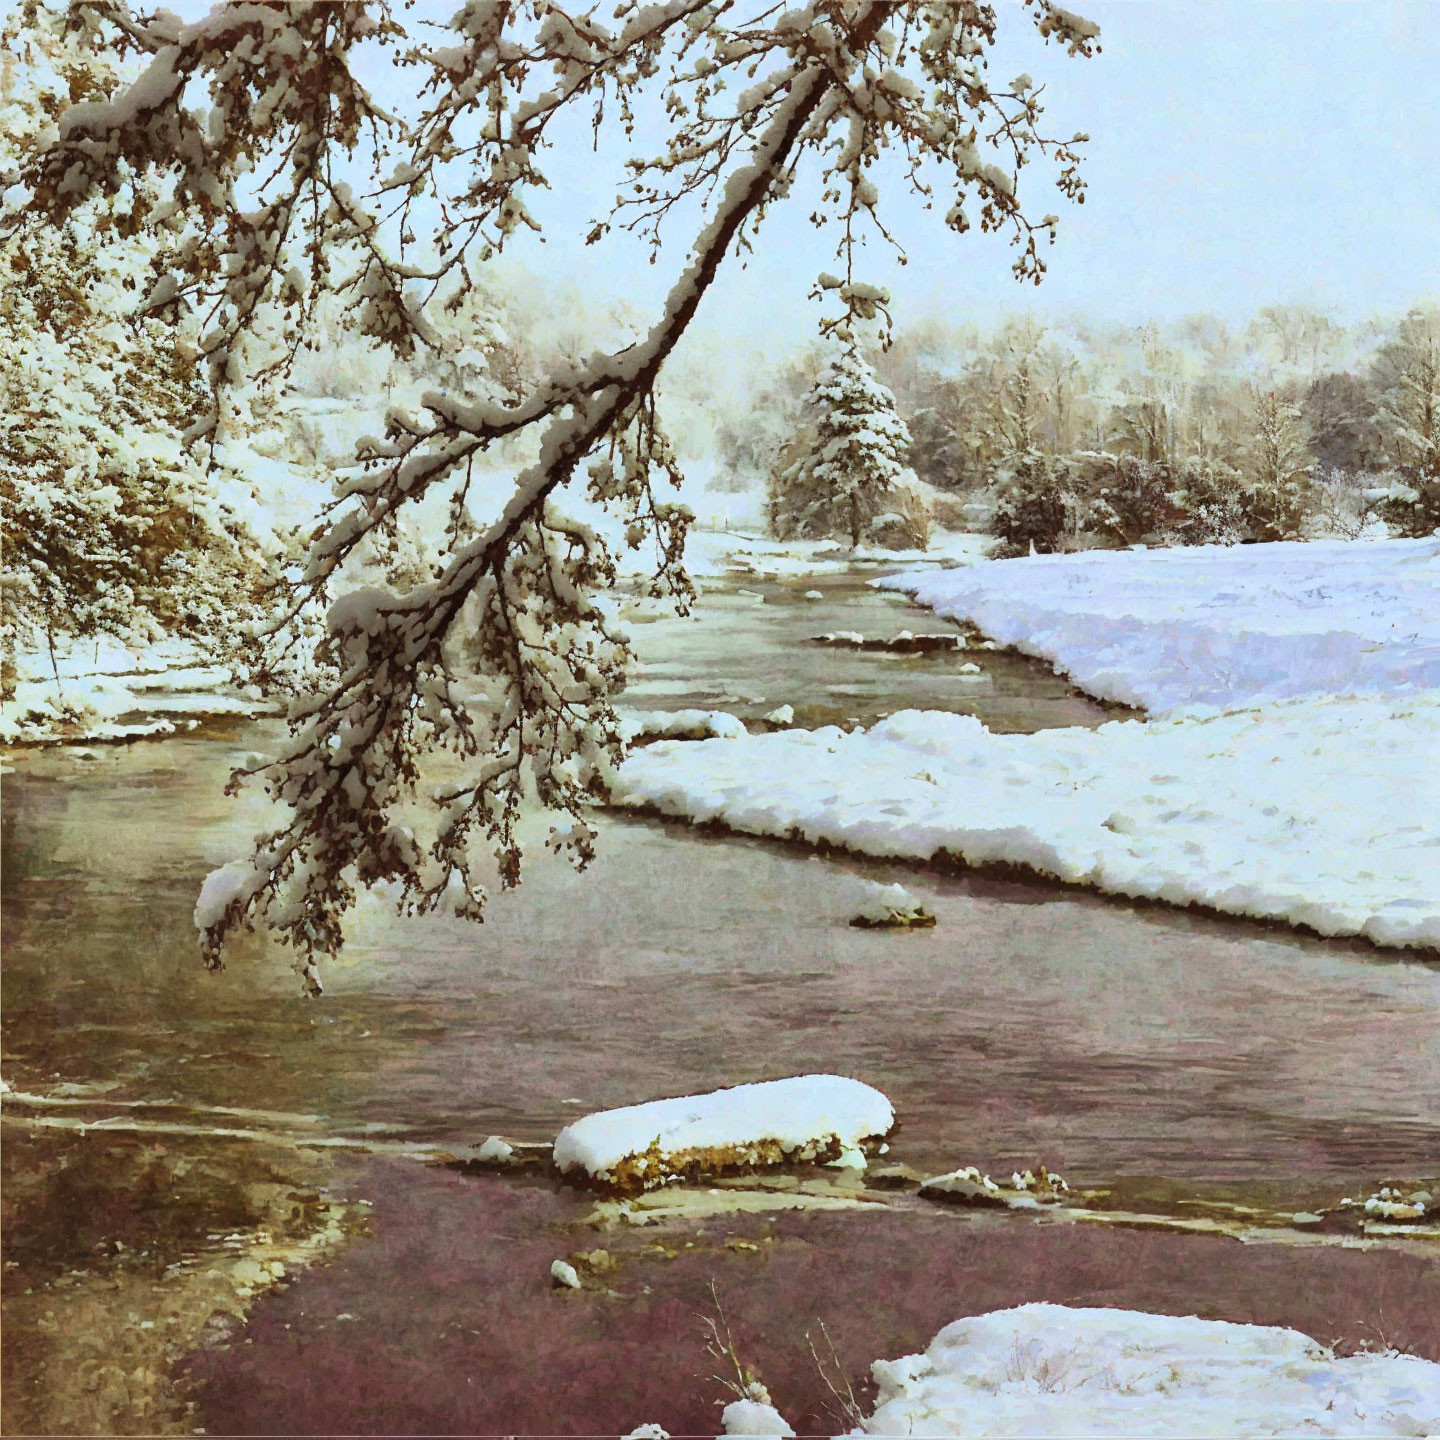 Snow-covered riverbank with flowing river and snowy rocks.